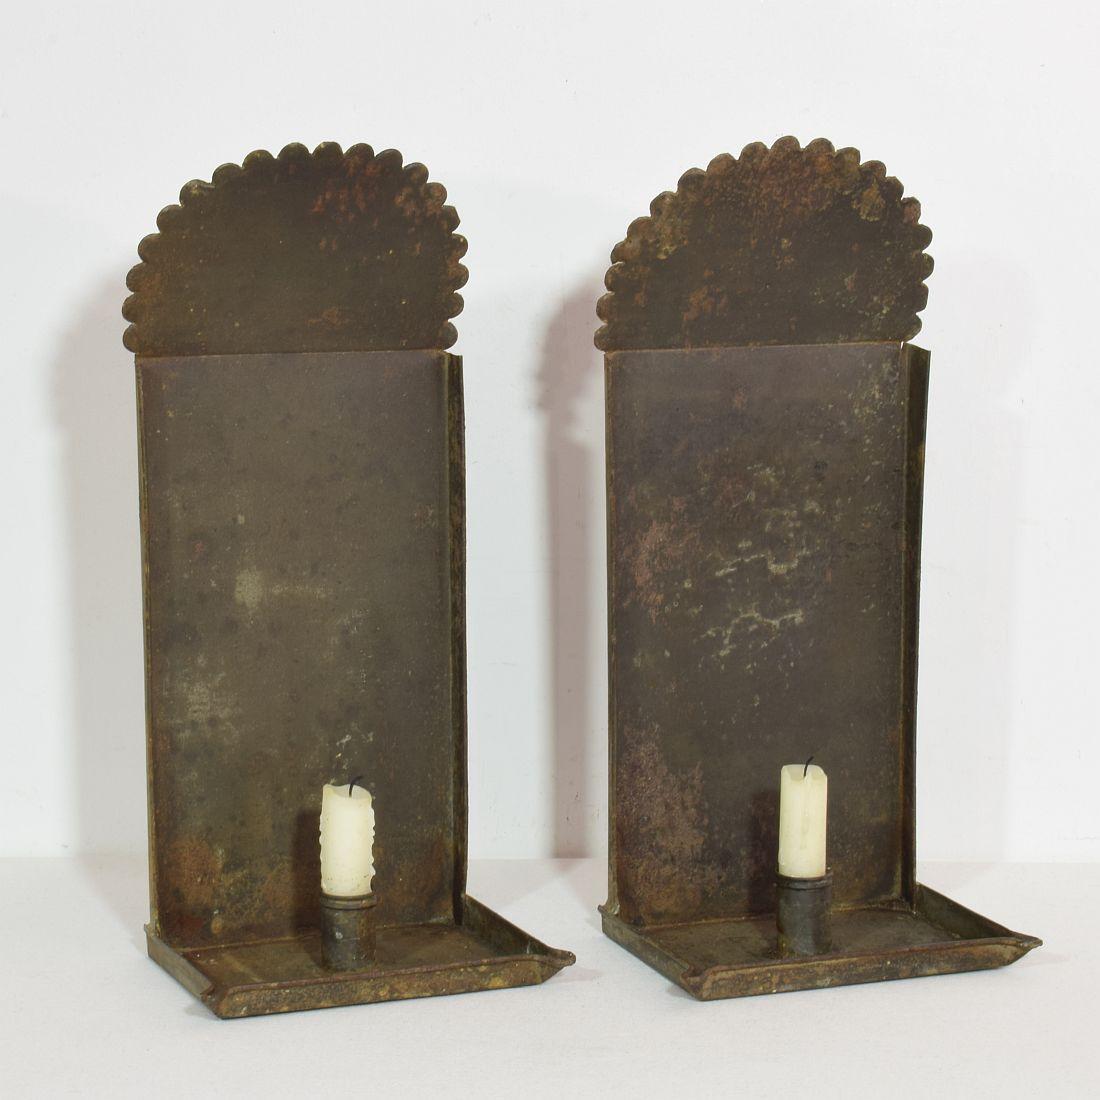 Hand-Crafted Pair of French, Late 18th, Early 19th Century Iron Wall Candleholders